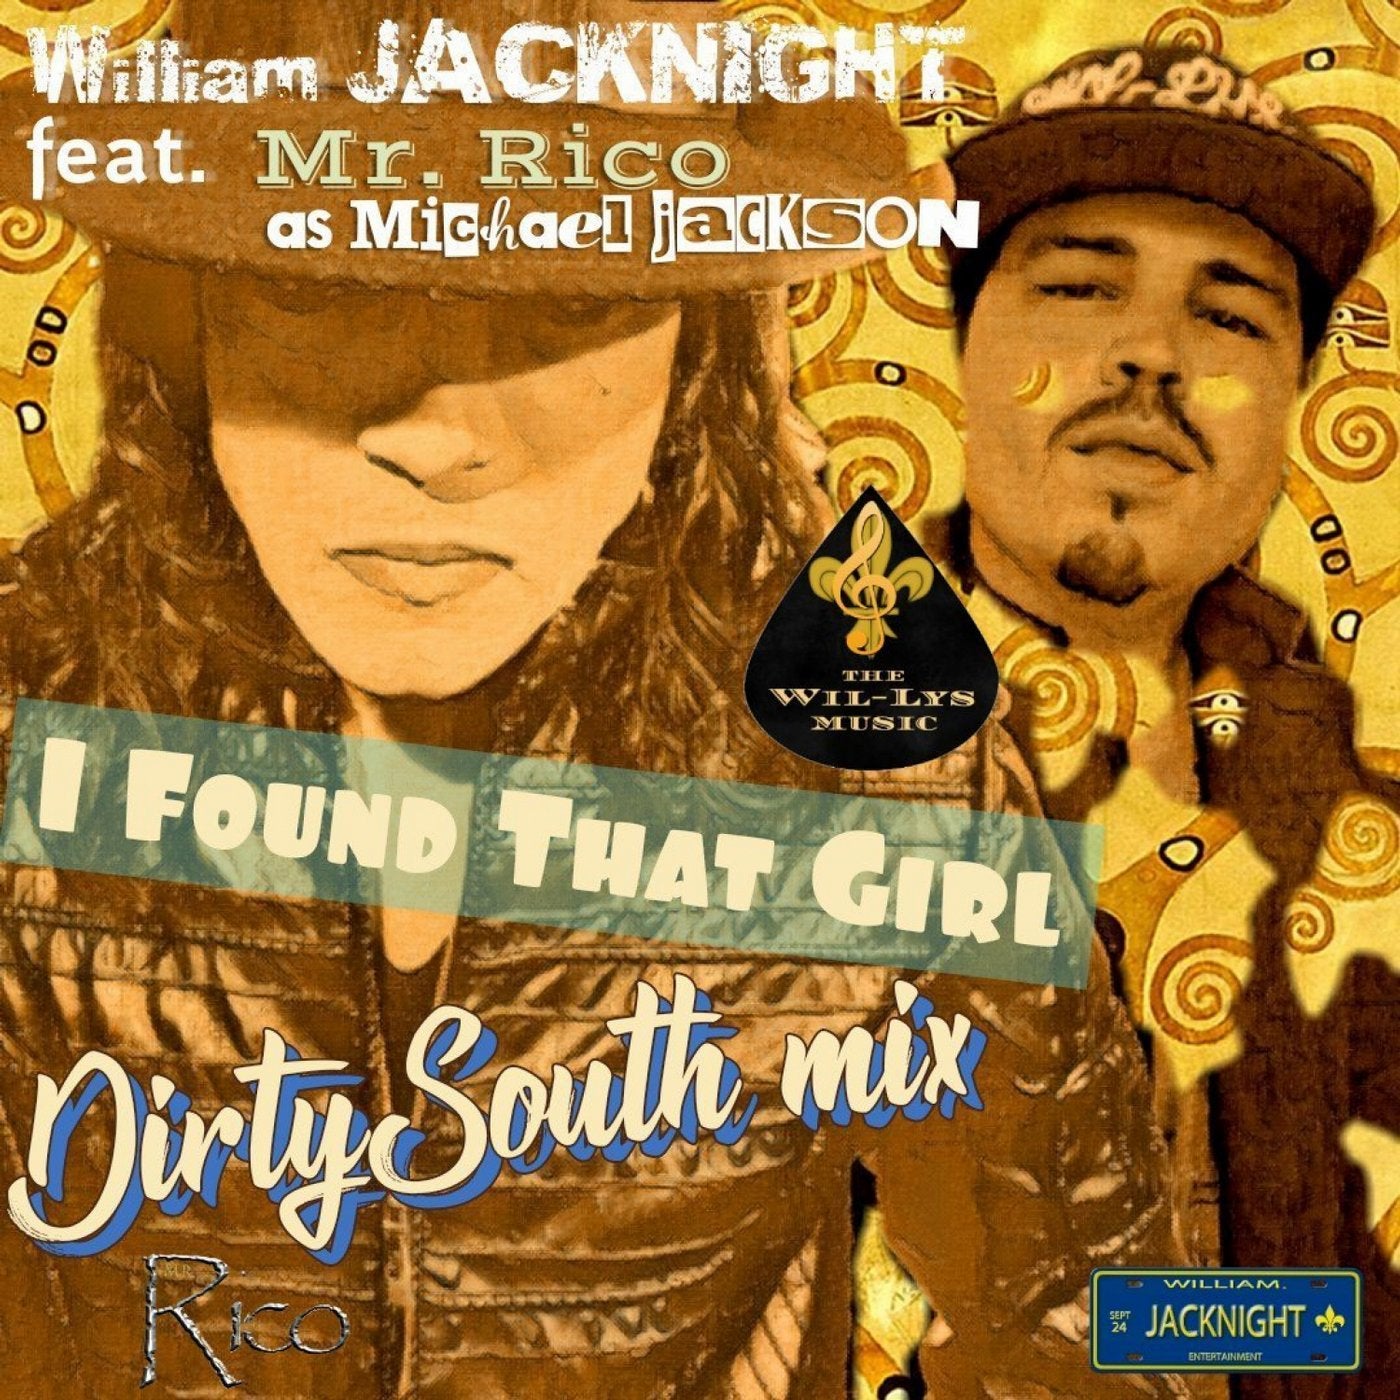 I Found That Girl (feat. Mr Rico as Michael JACKSON) [DirtySouth Mix]